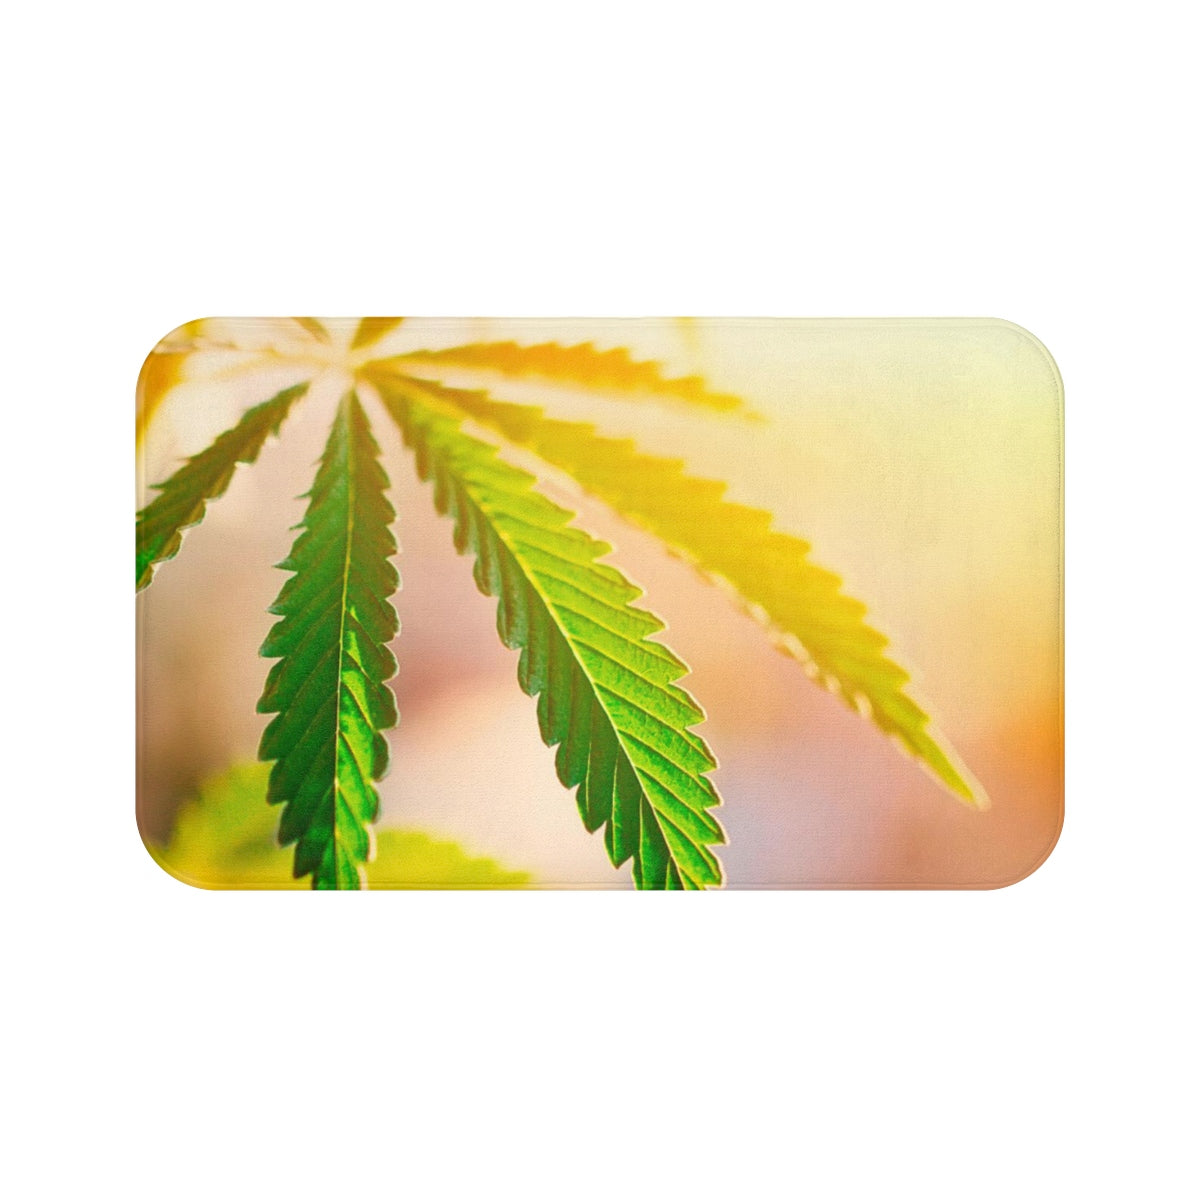 Sunrise Sunset Cannabis Custom Designed Shower Mat .  A Unique Cannabis Gift For Friends & Family. Cannabis Decor For Your Home.